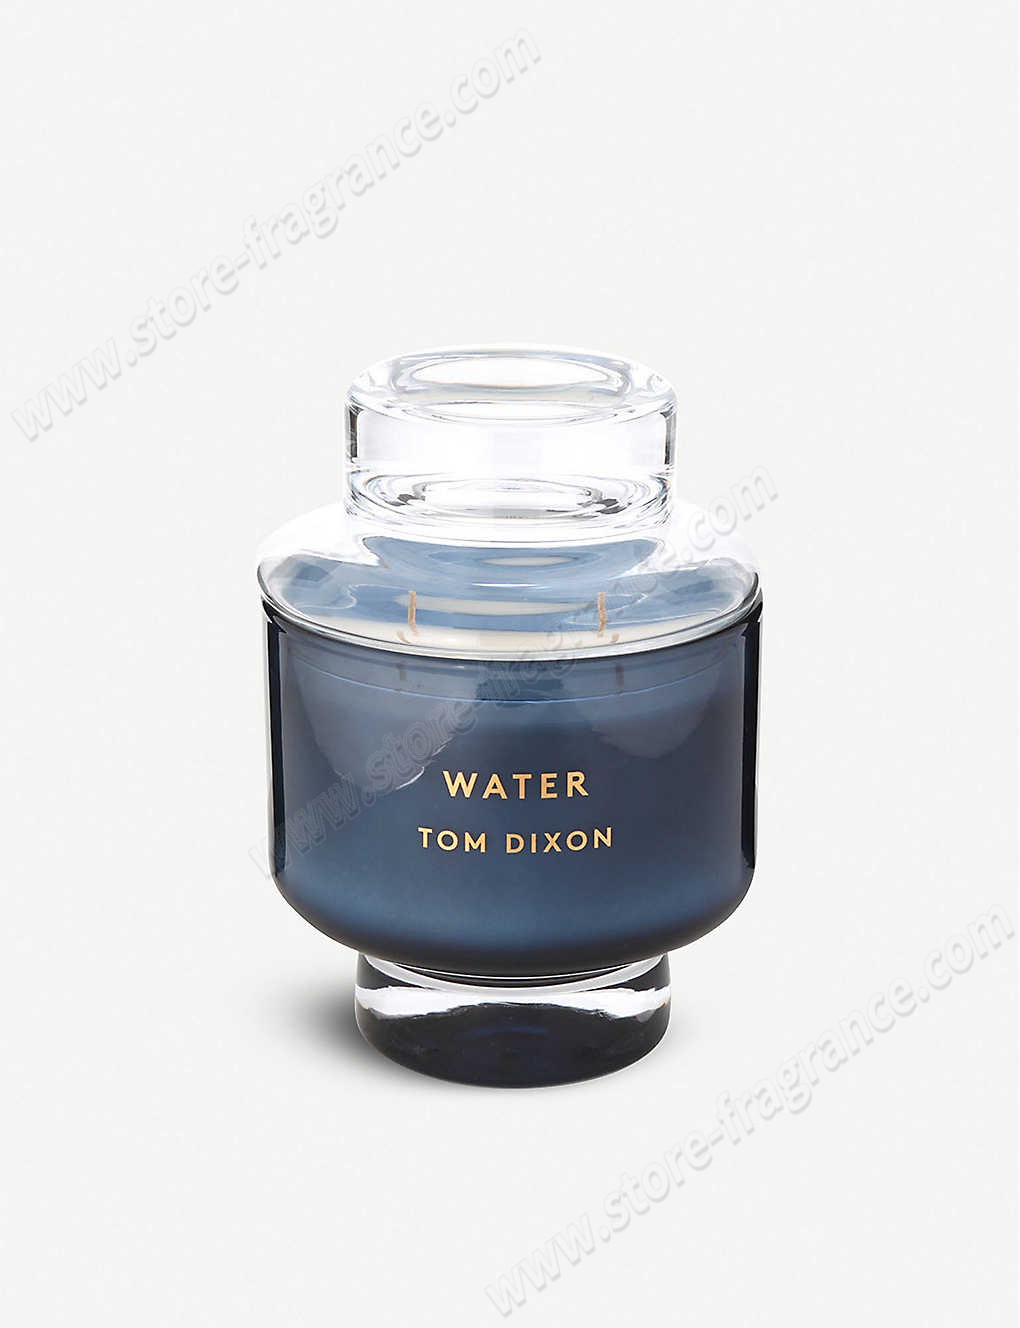 TOM DIXON/SCENT Water large candle ✿ Discount Store - TOM DIXON/SCENT Water large candle ✿ Discount Store